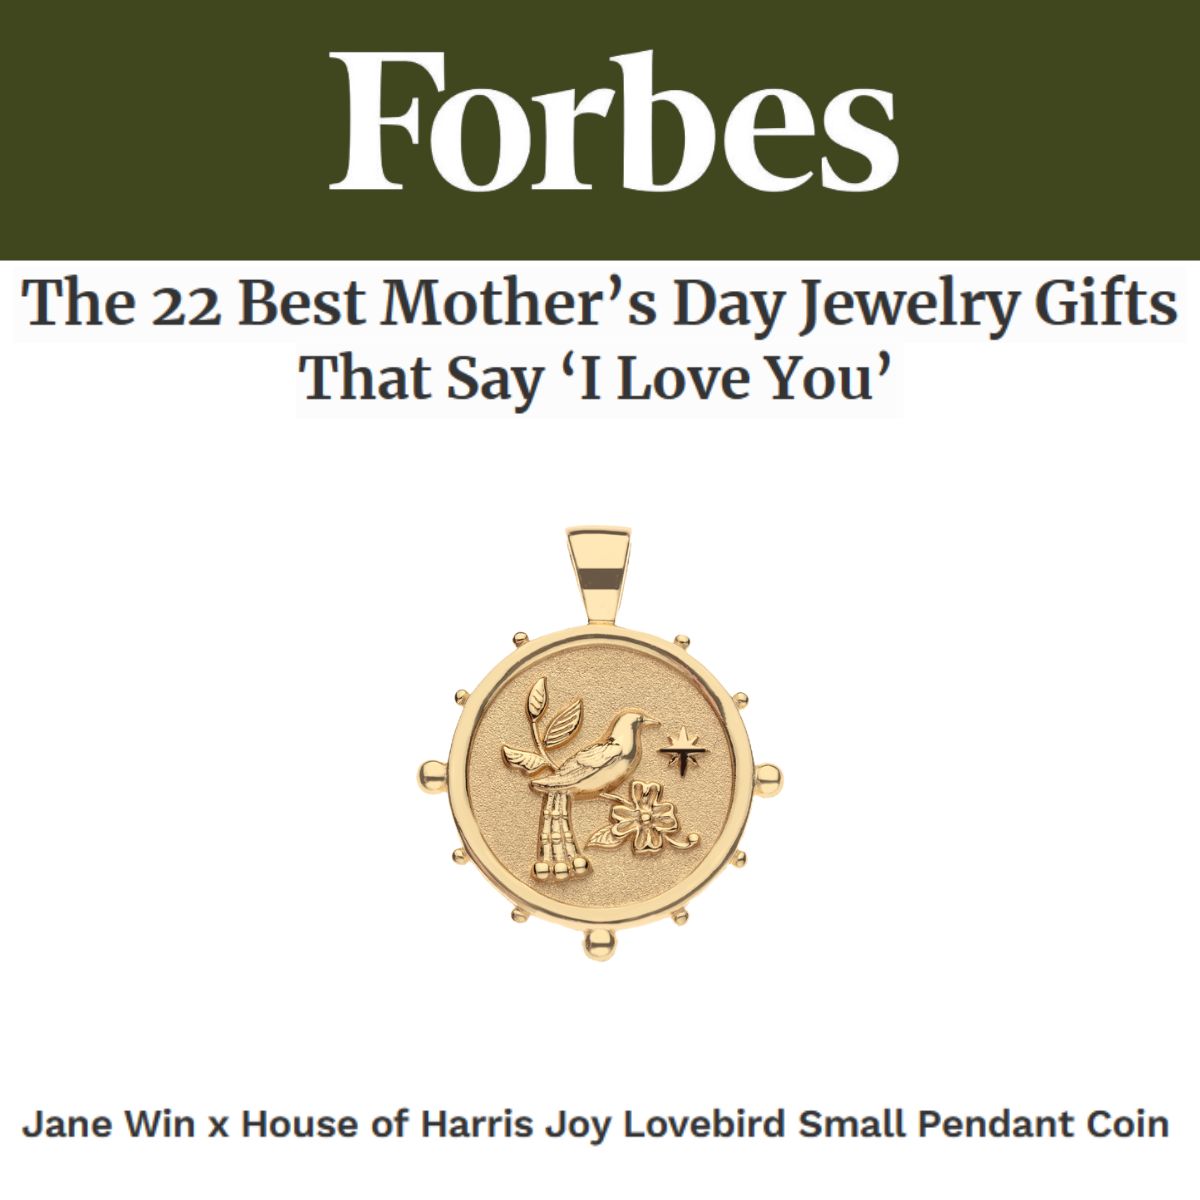 Press Highlight: Vogue's "Best Mother's Day Jewelry Gifts That Say 'I Love You'"